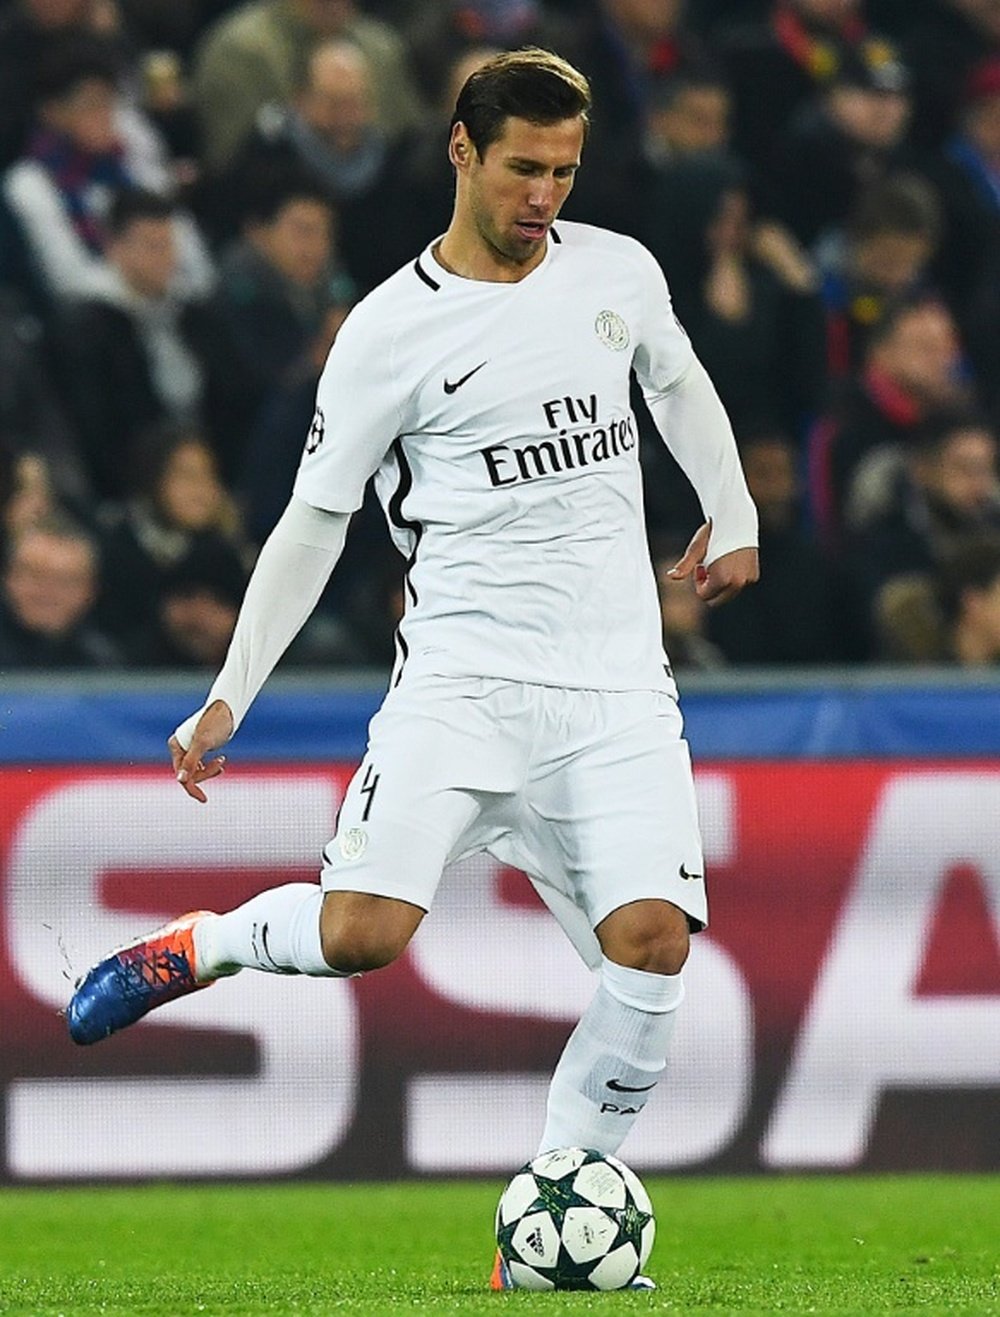 Krychowiak believes it would make no sense to leave PSG after only 6 months.